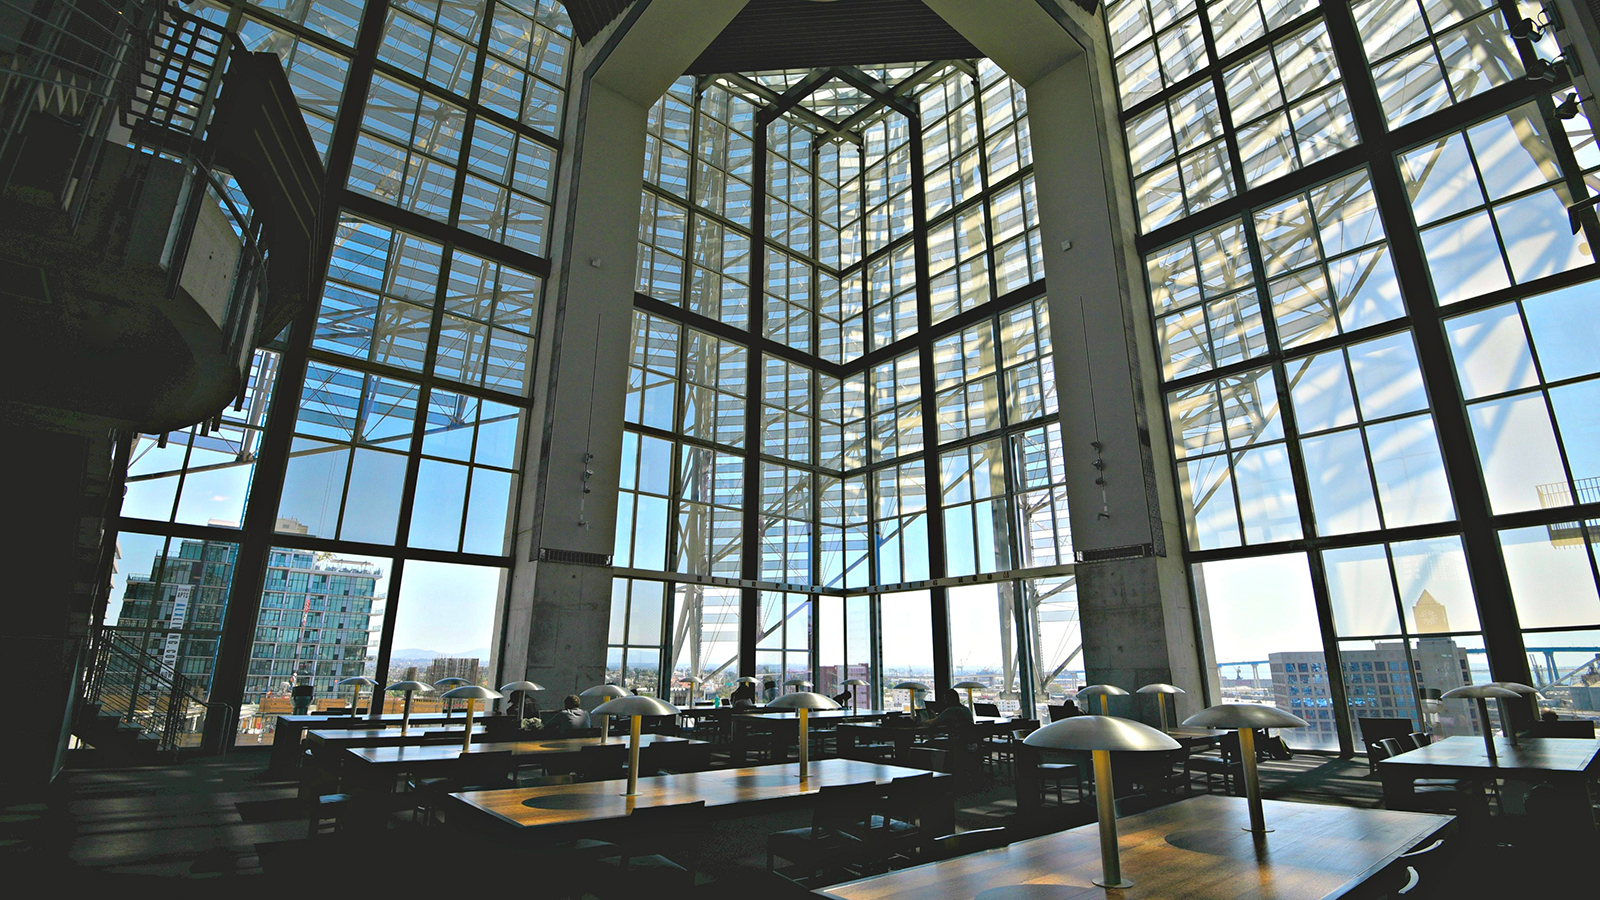 San Diego, California. March 1, 2018. Interior view of the Price Reading Room  on the eighth floor of the Central Library, surrounded by glass.